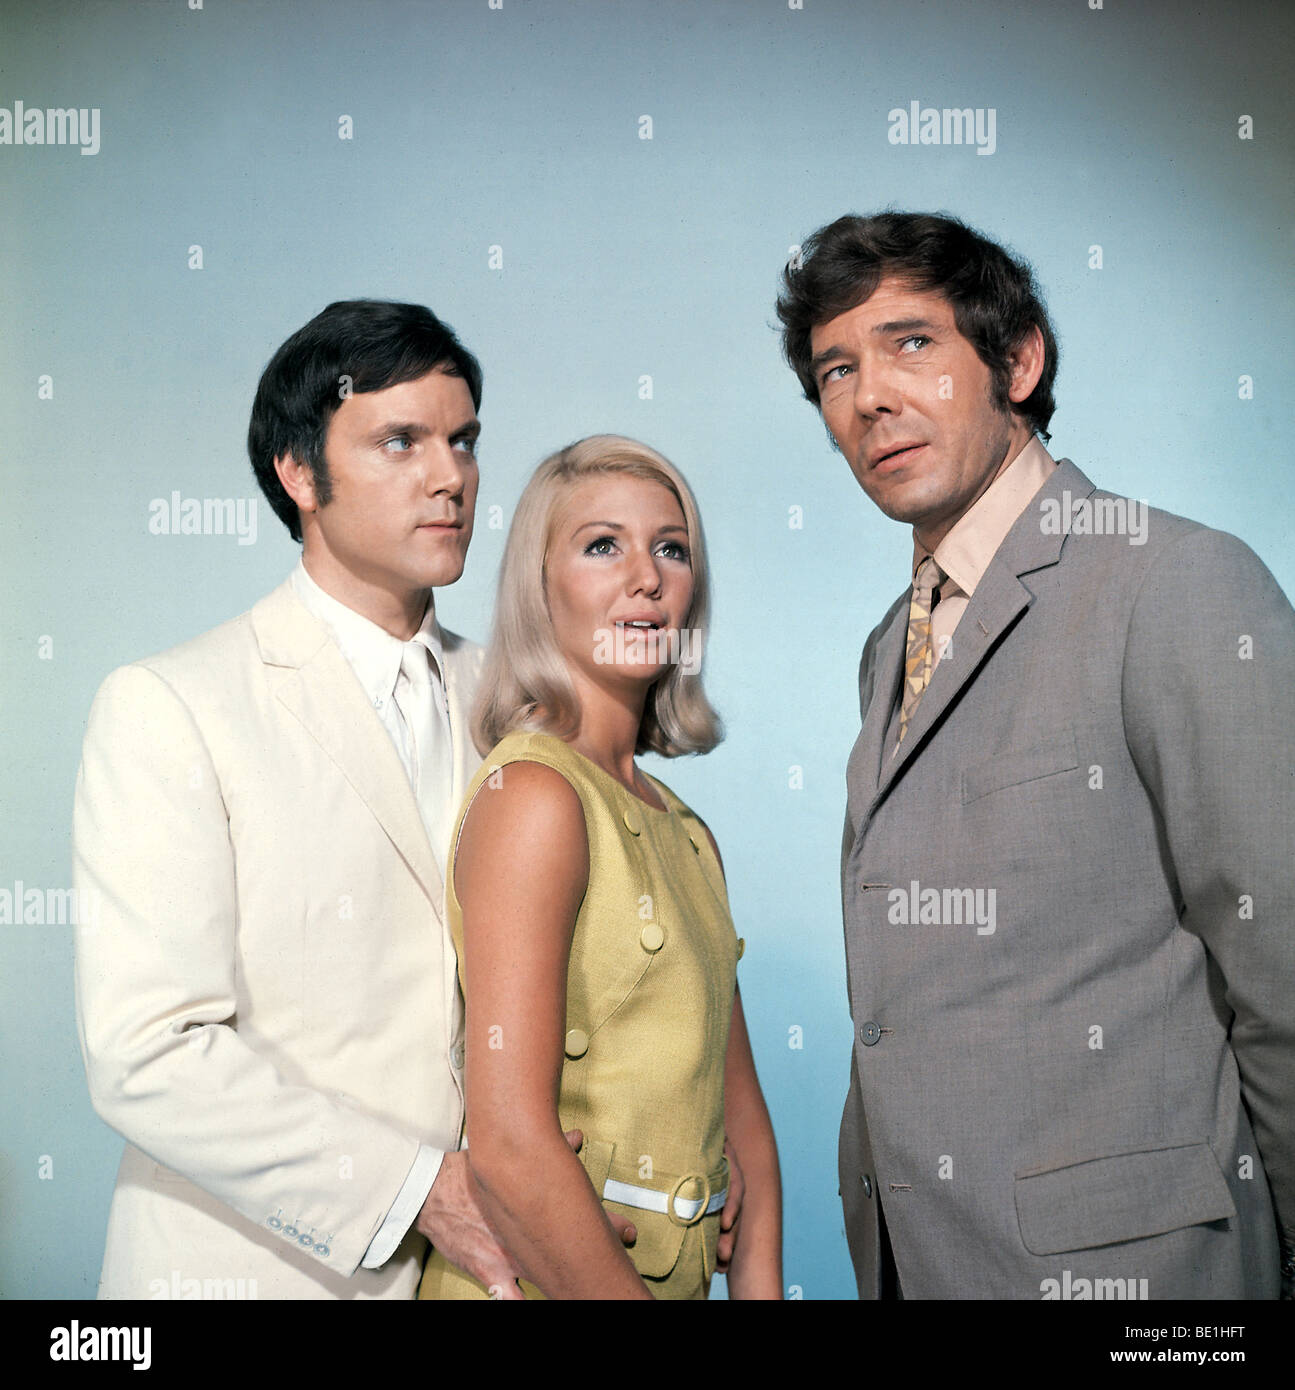 RANDALL AND HOPKIRK DECEASED - UK TV series 1969-1970  from l: Kenneth Cope, Annette Andre and Mike Pratt -  Description below Stock Photo